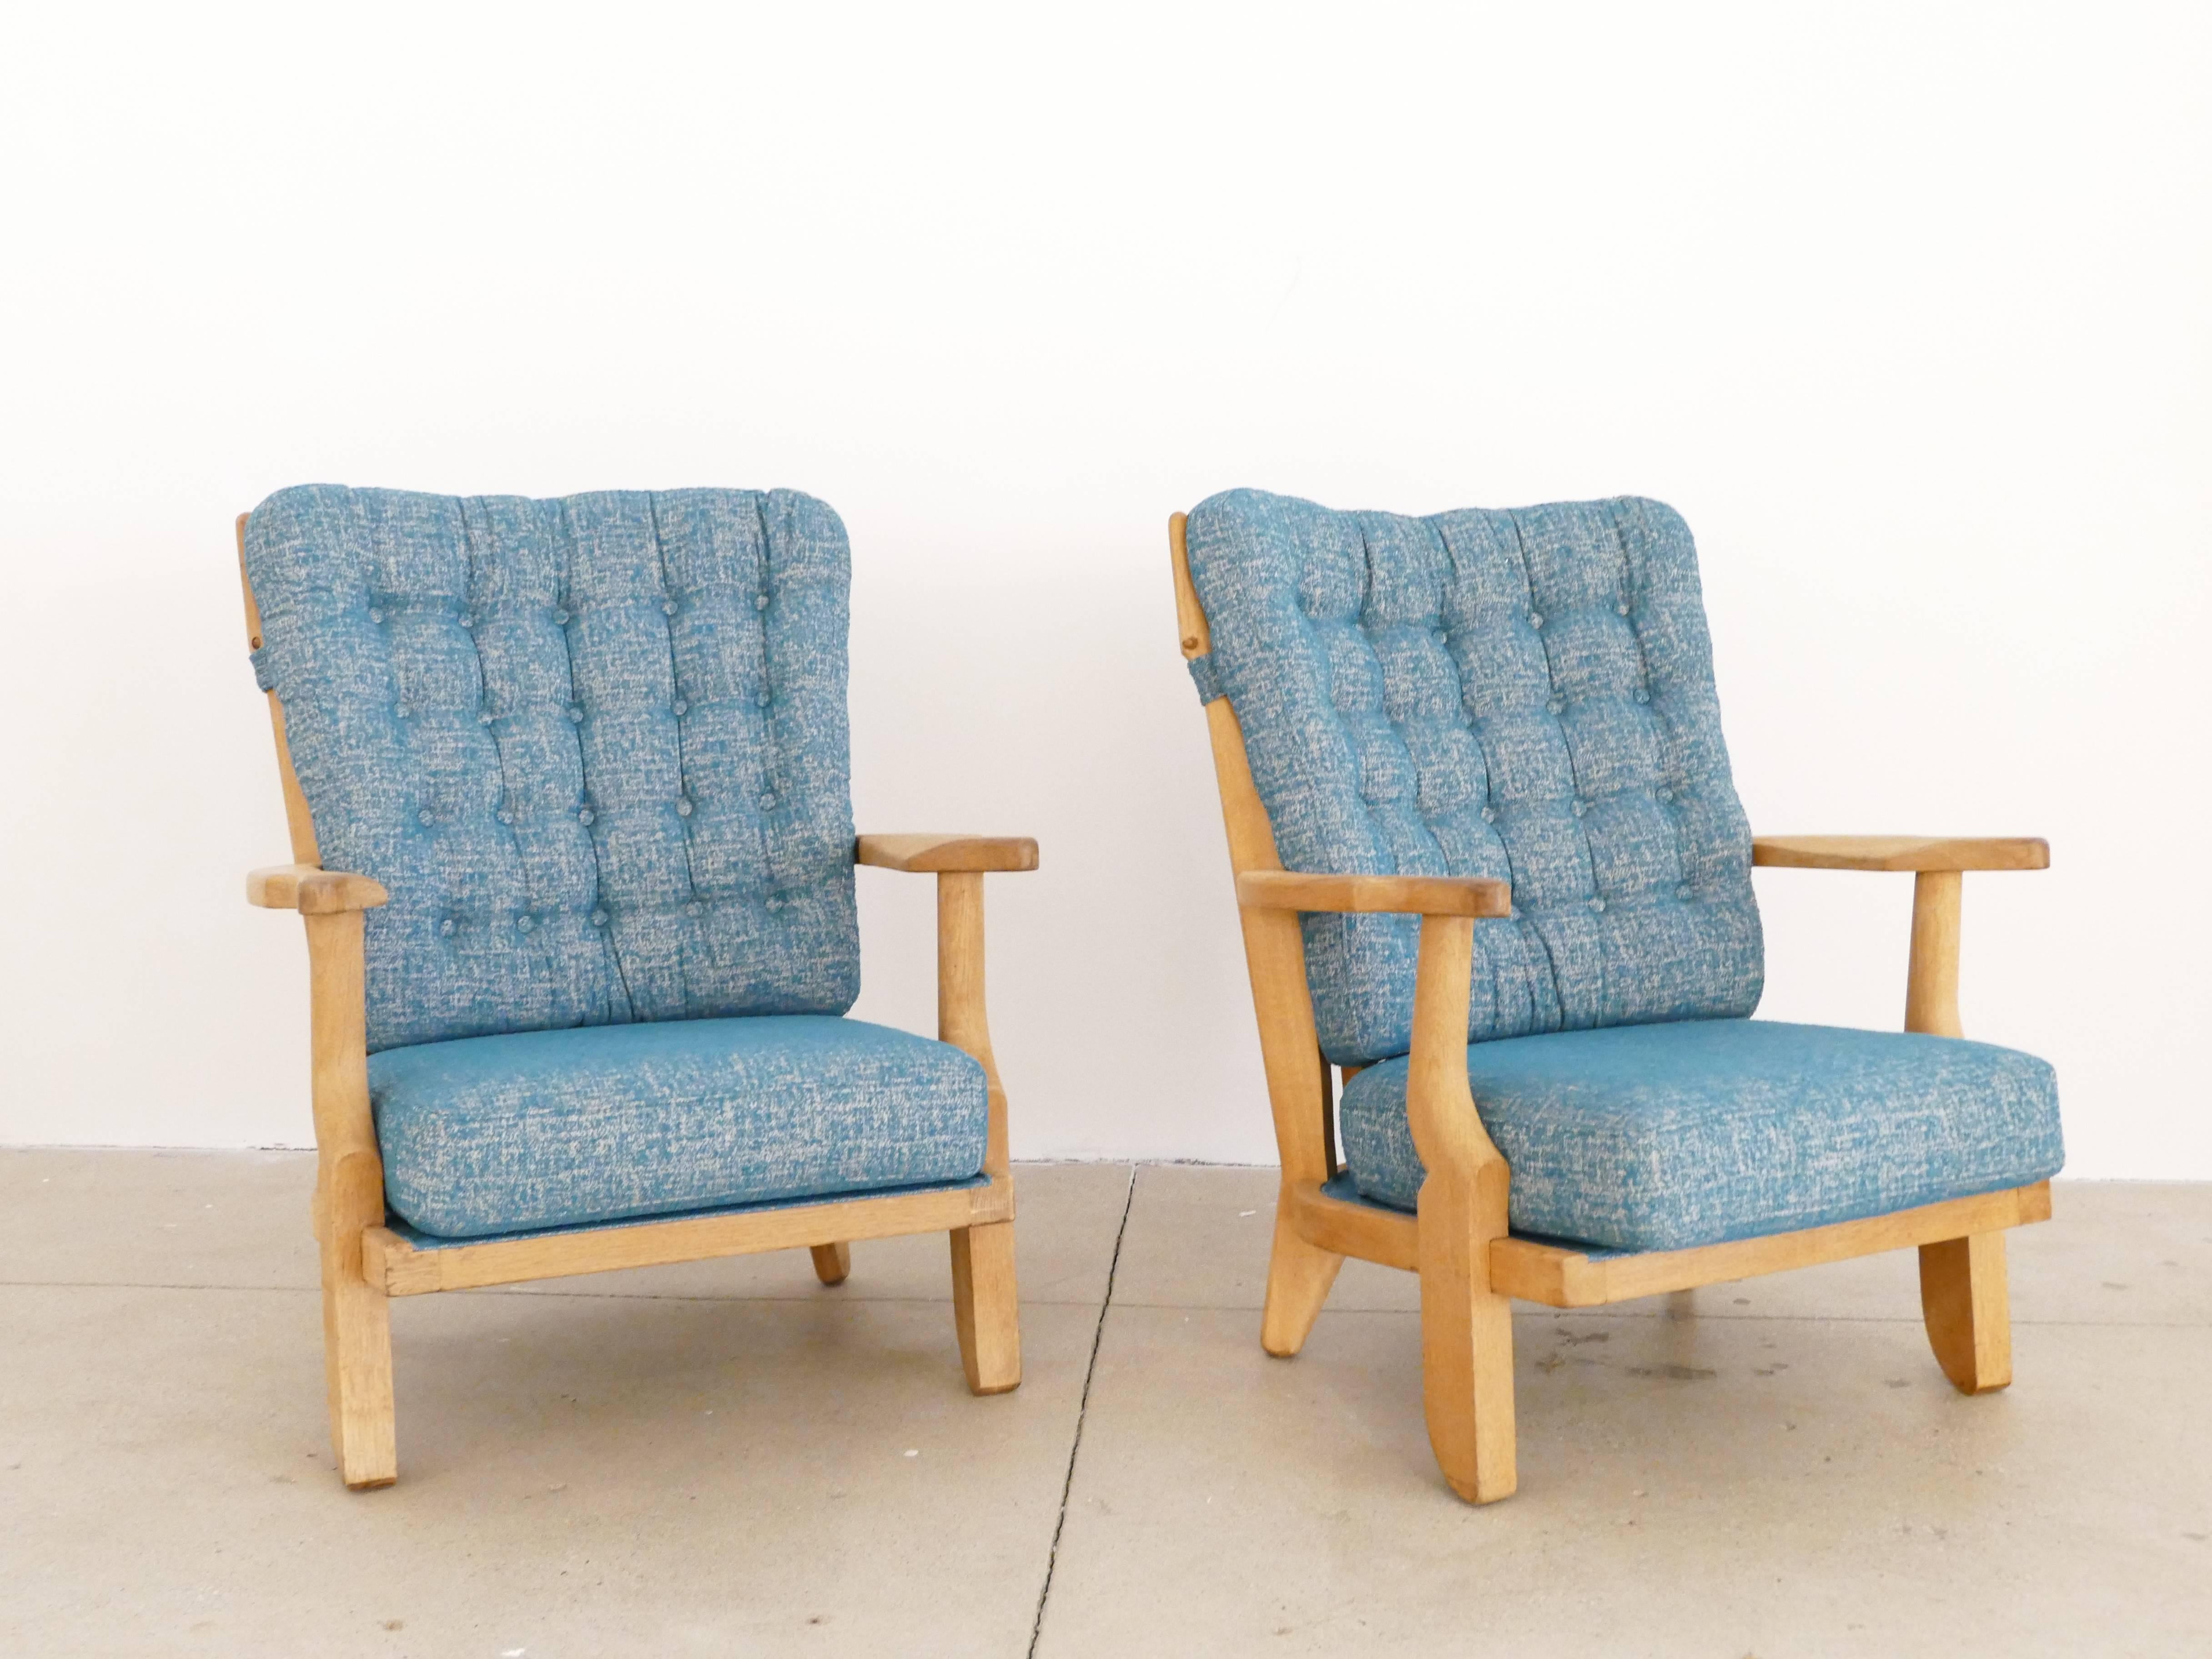 Two armchairs in excellent condition. The frame is solid, clean and in perfect condition. The new cushions have a teal colored cotton fabric reminiscent of the era of production. The spine work of the back are the signature of the artists. These